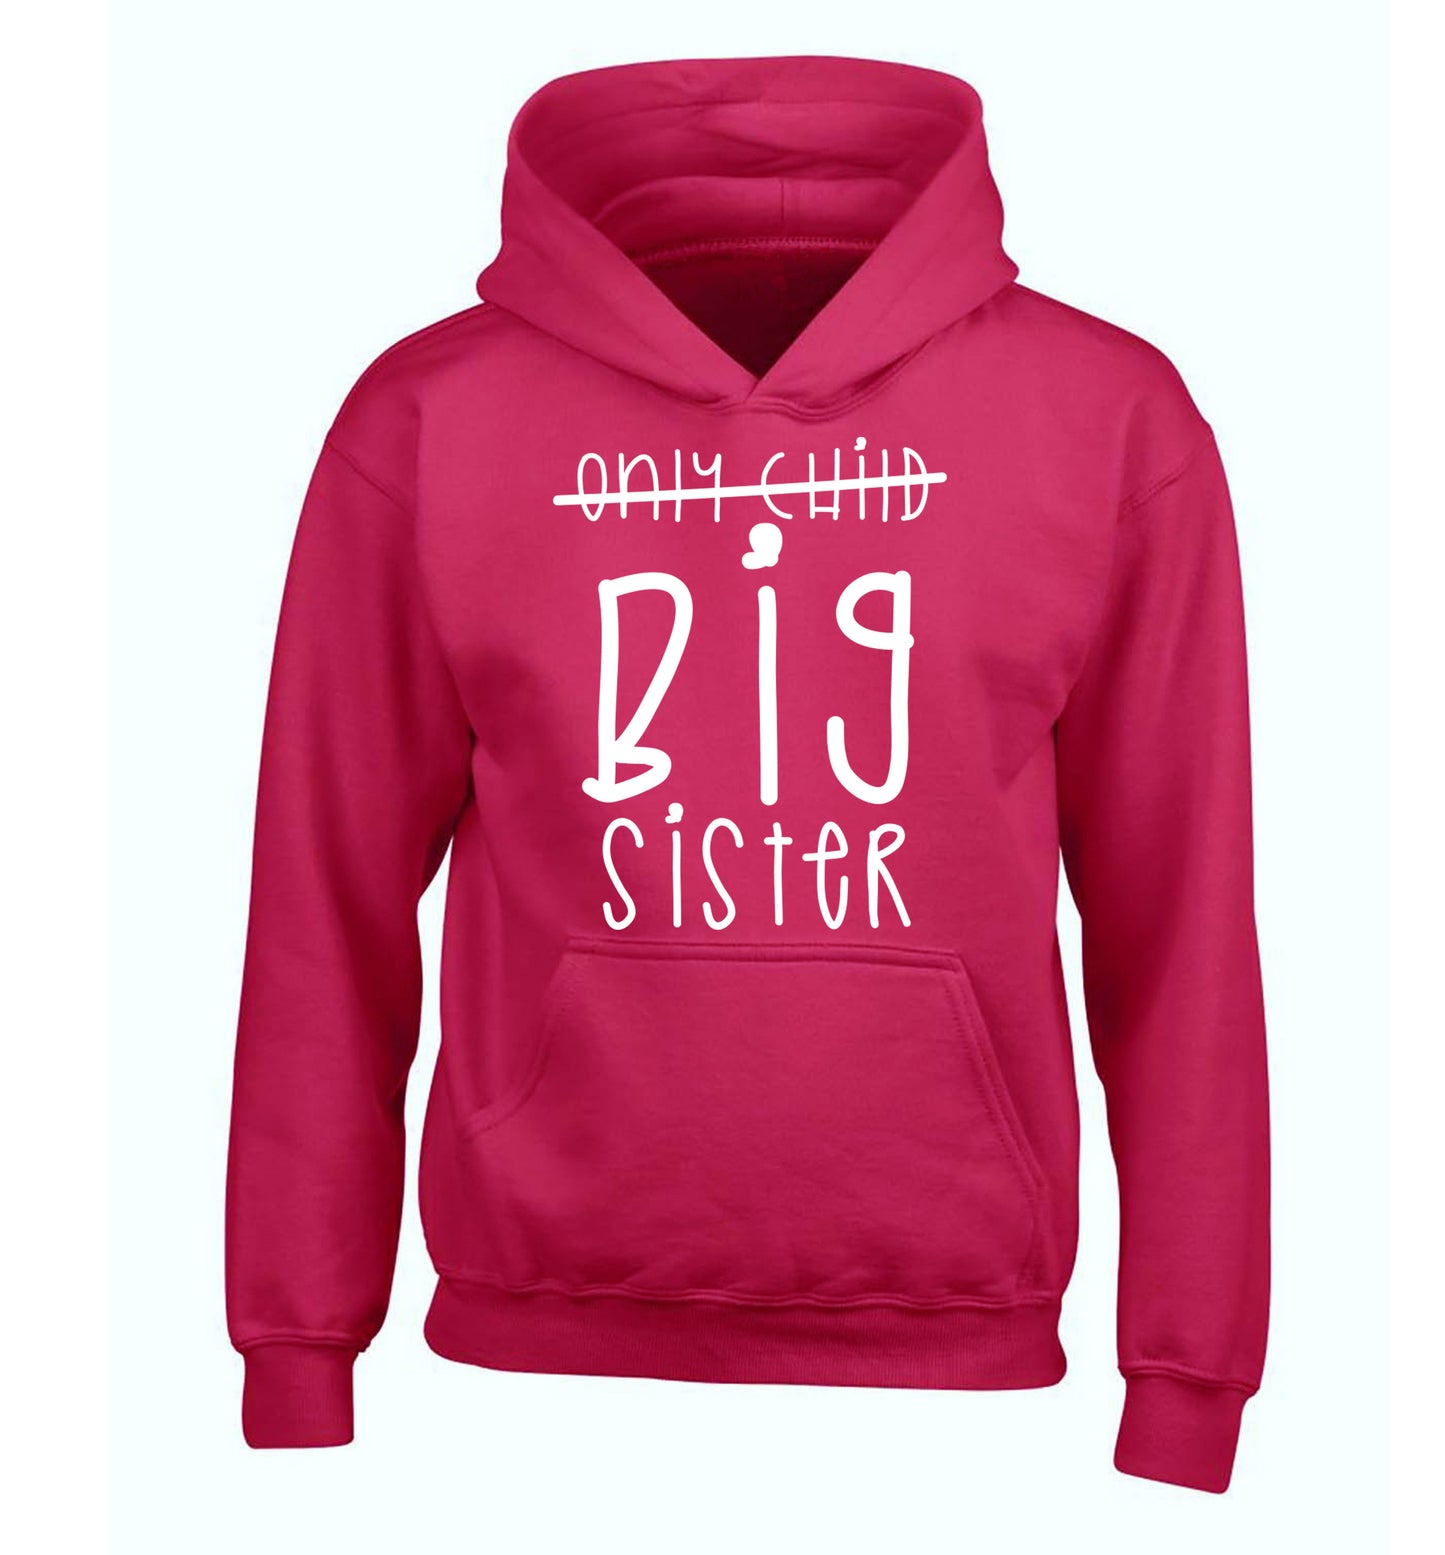 Only child big sister children's pink hoodie 12-14 Years